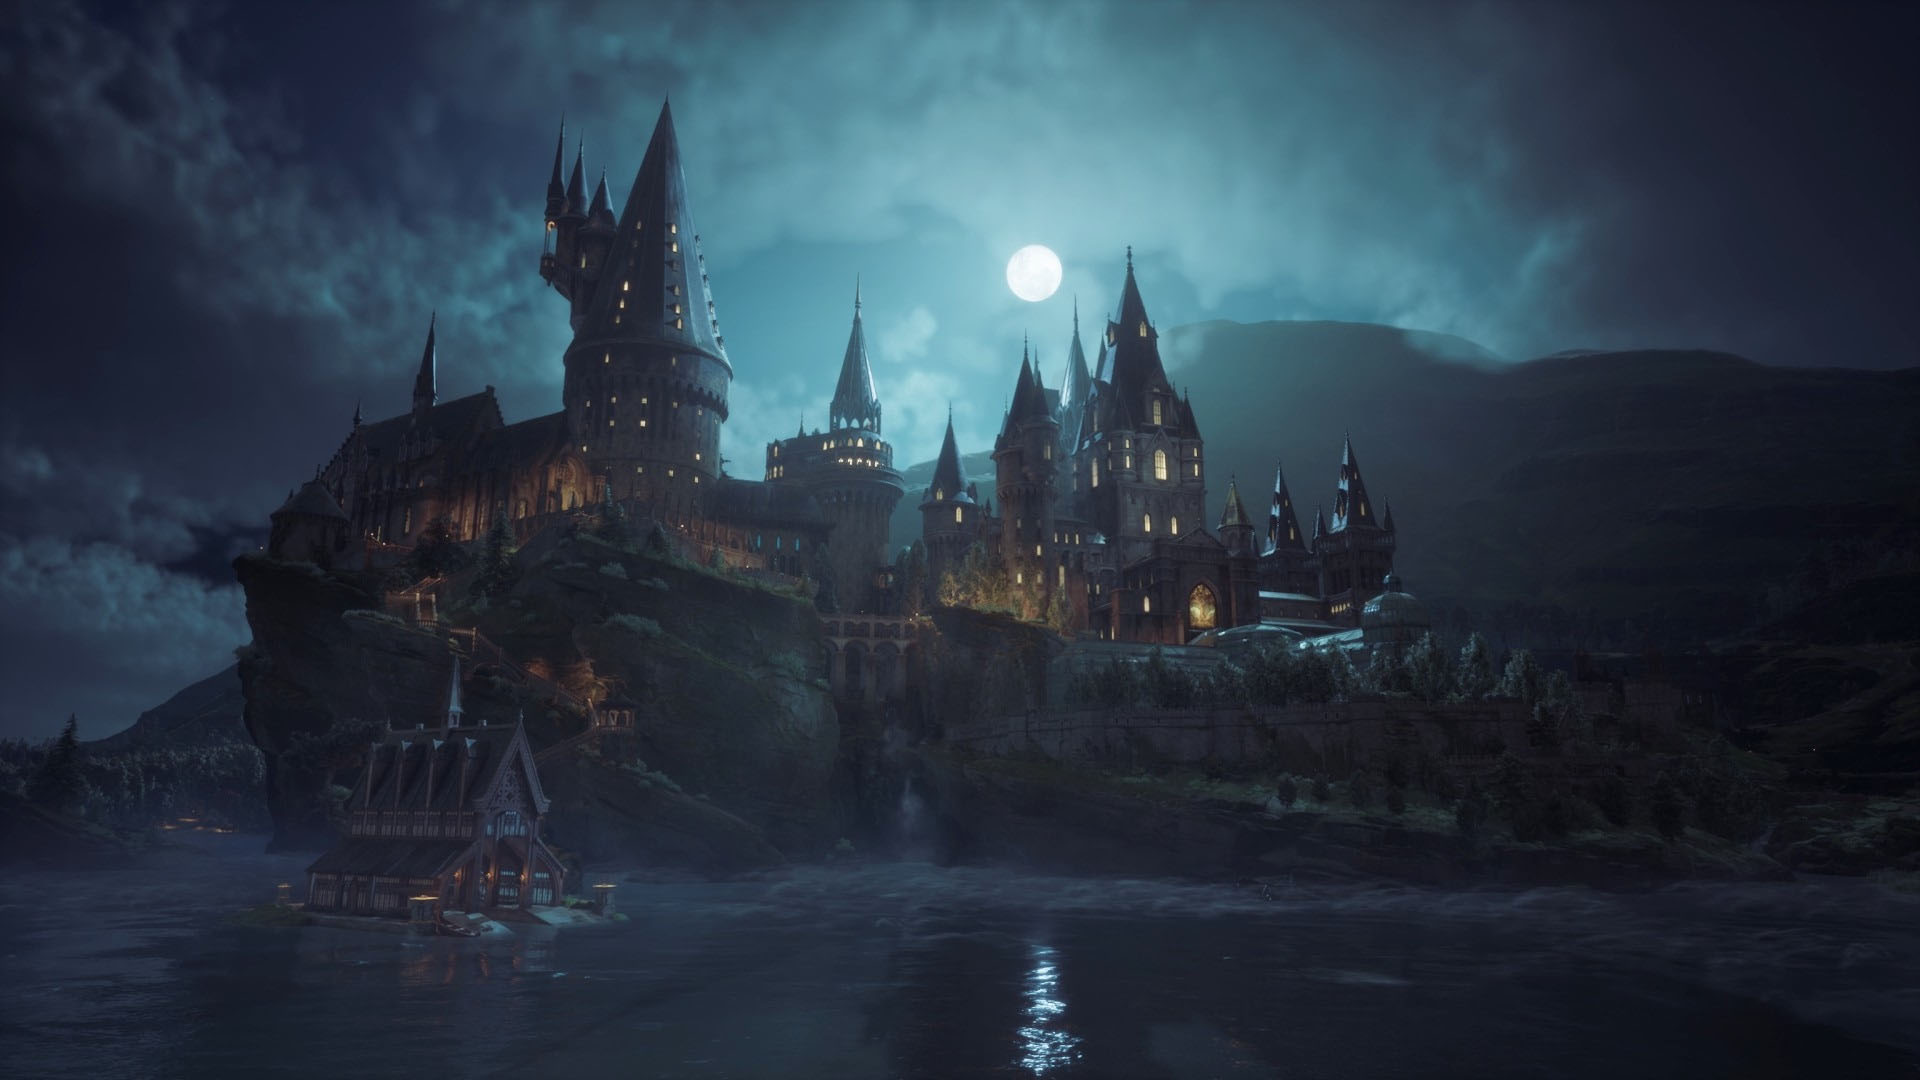 Hogwarts Legacy is one of Steam's top-selling game even a month before  release